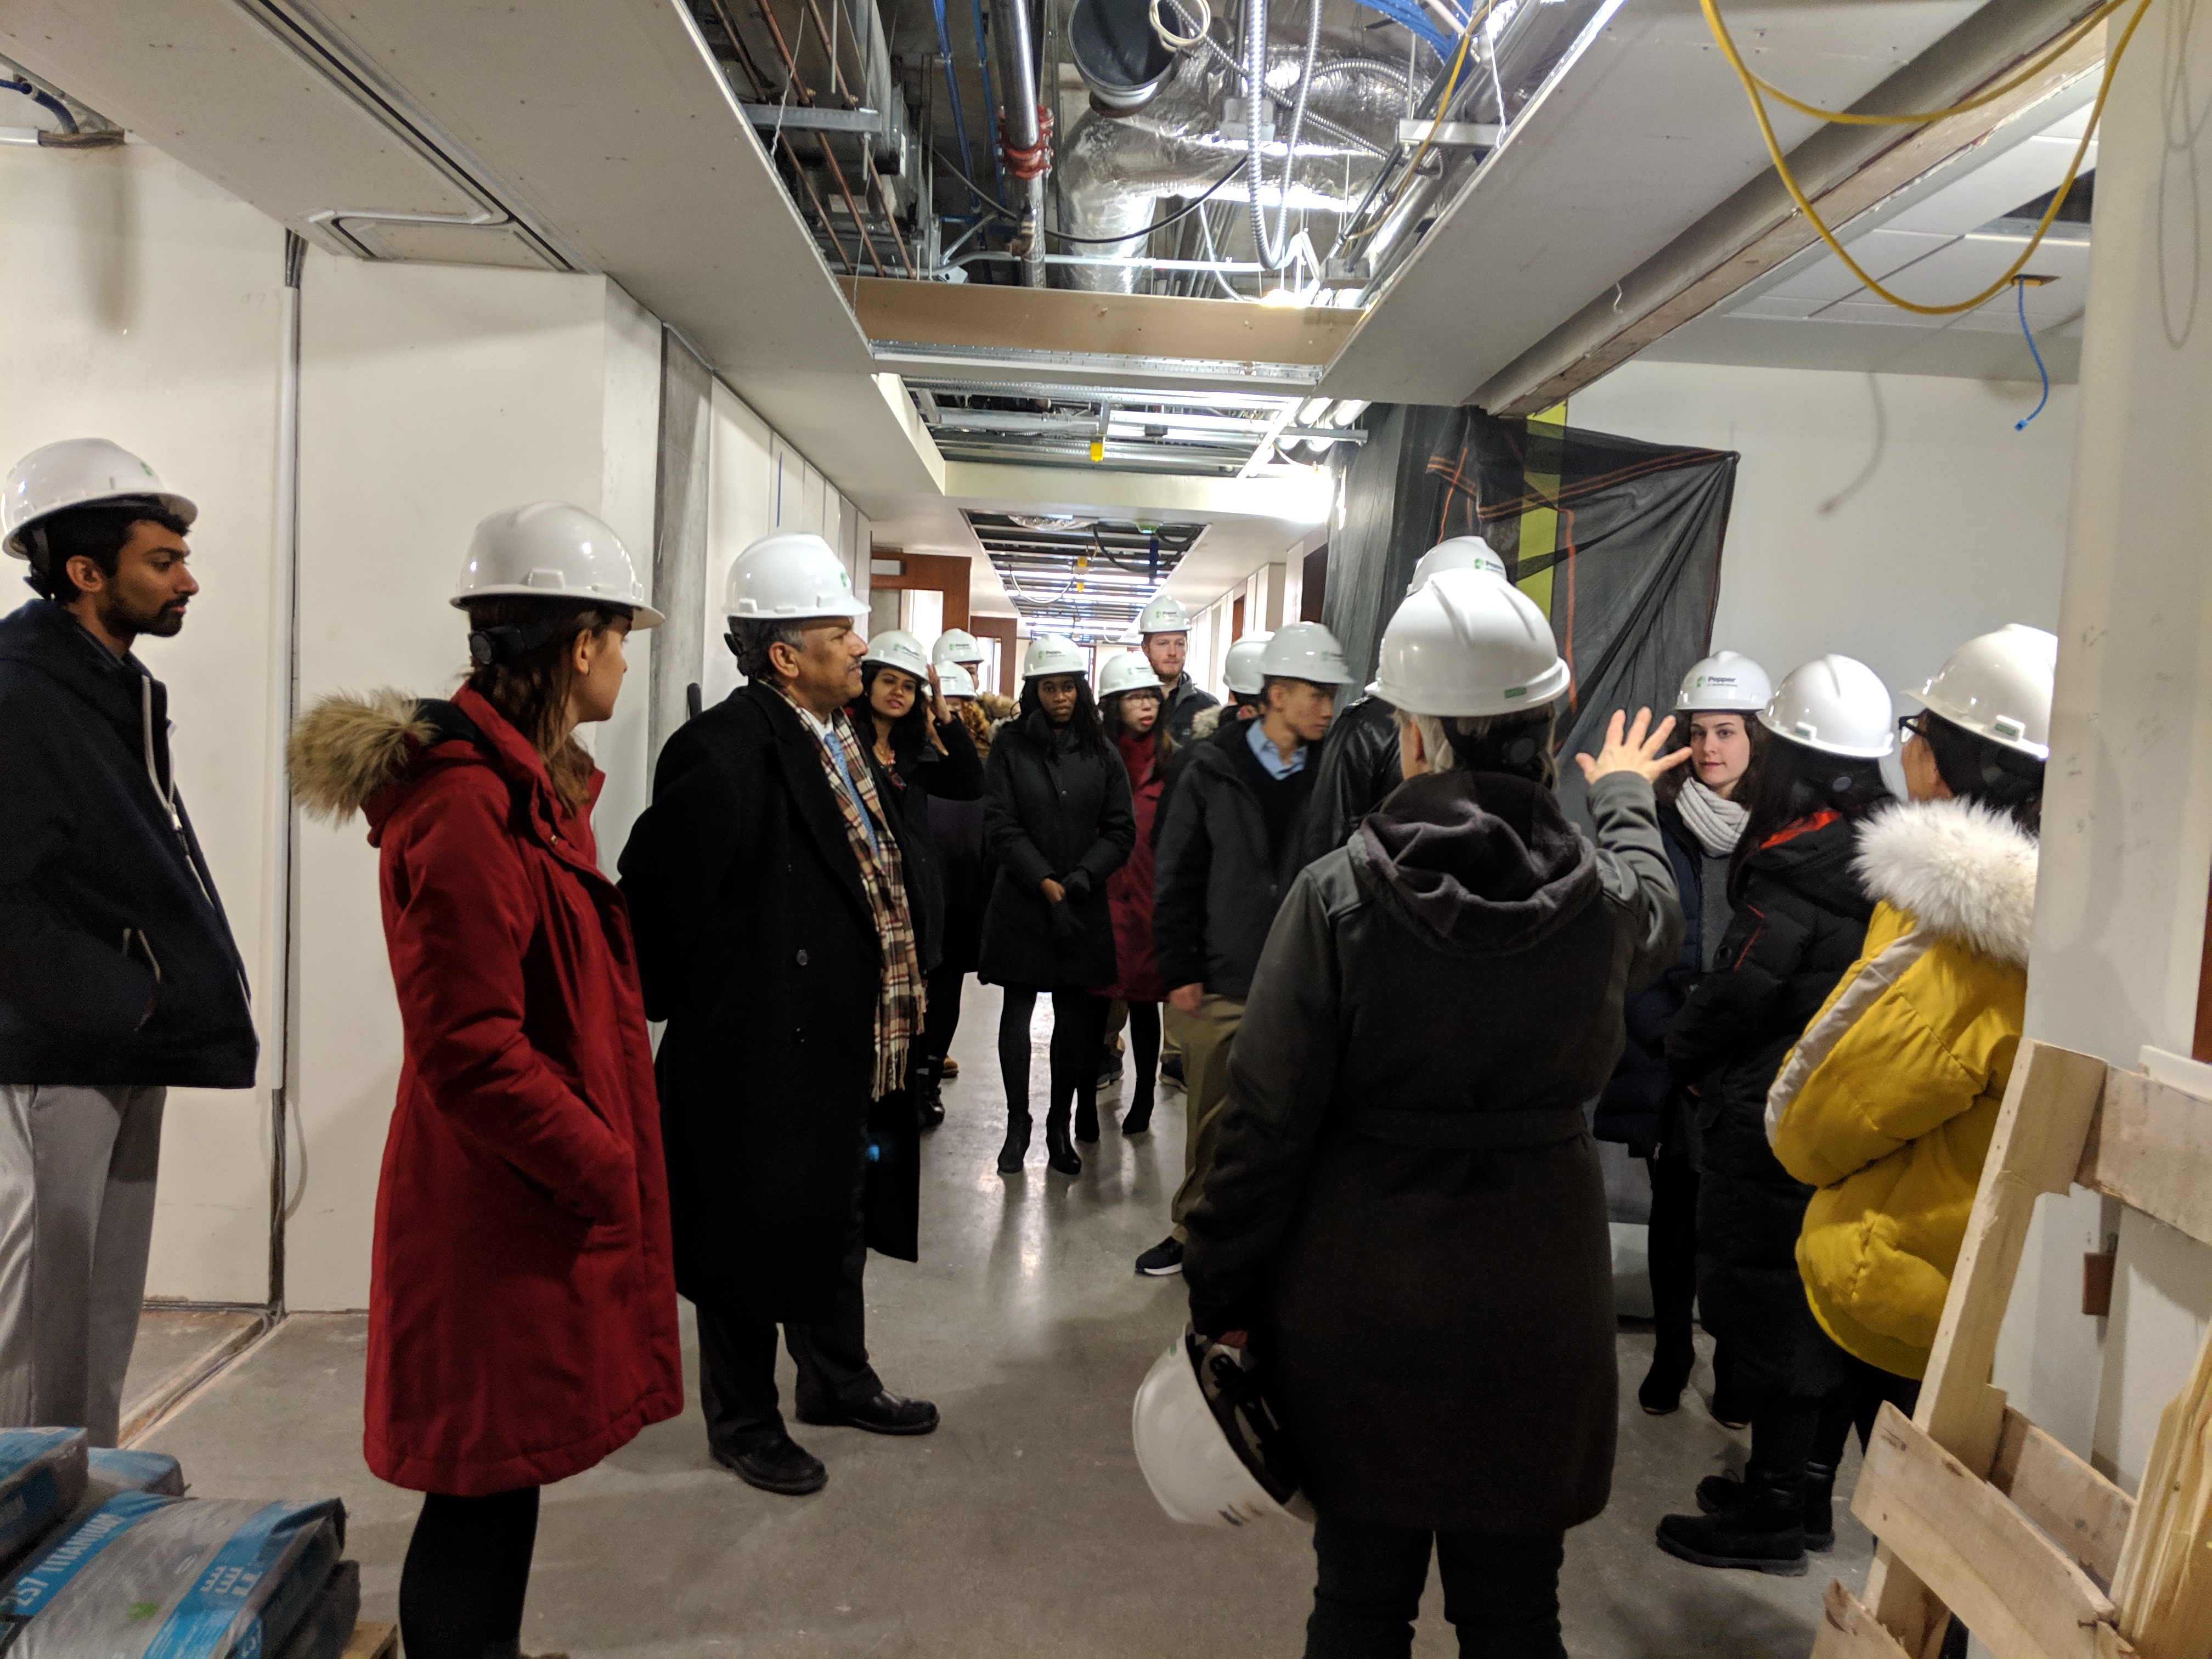 Construction workers walked the group through their new space.